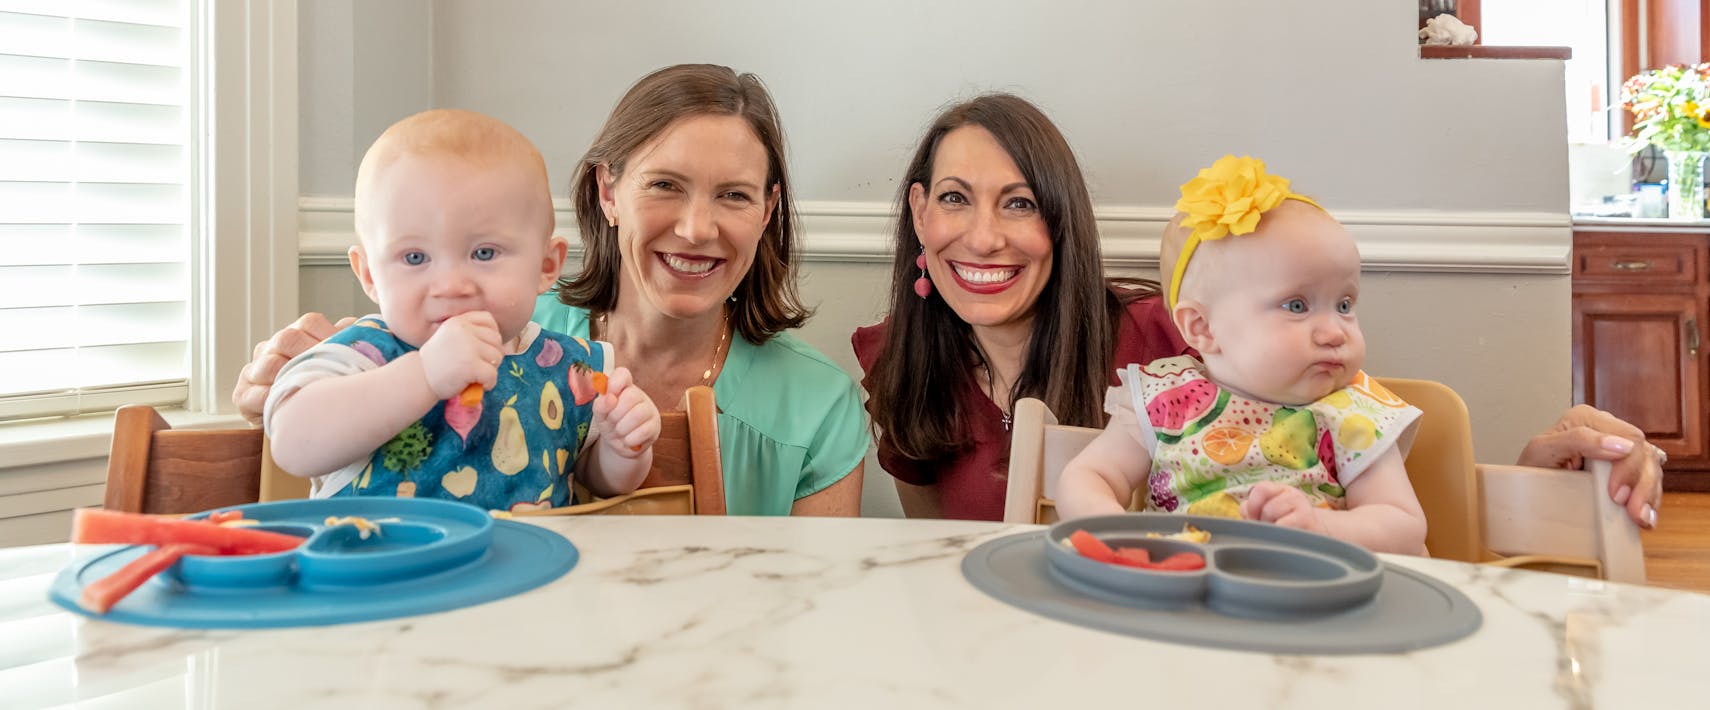 Feeding experts Katie Ferraro and Dawn Winkelmann crouched down together between two babies seated in high chairs who are eating food out of ezpz suction Mini Mats.